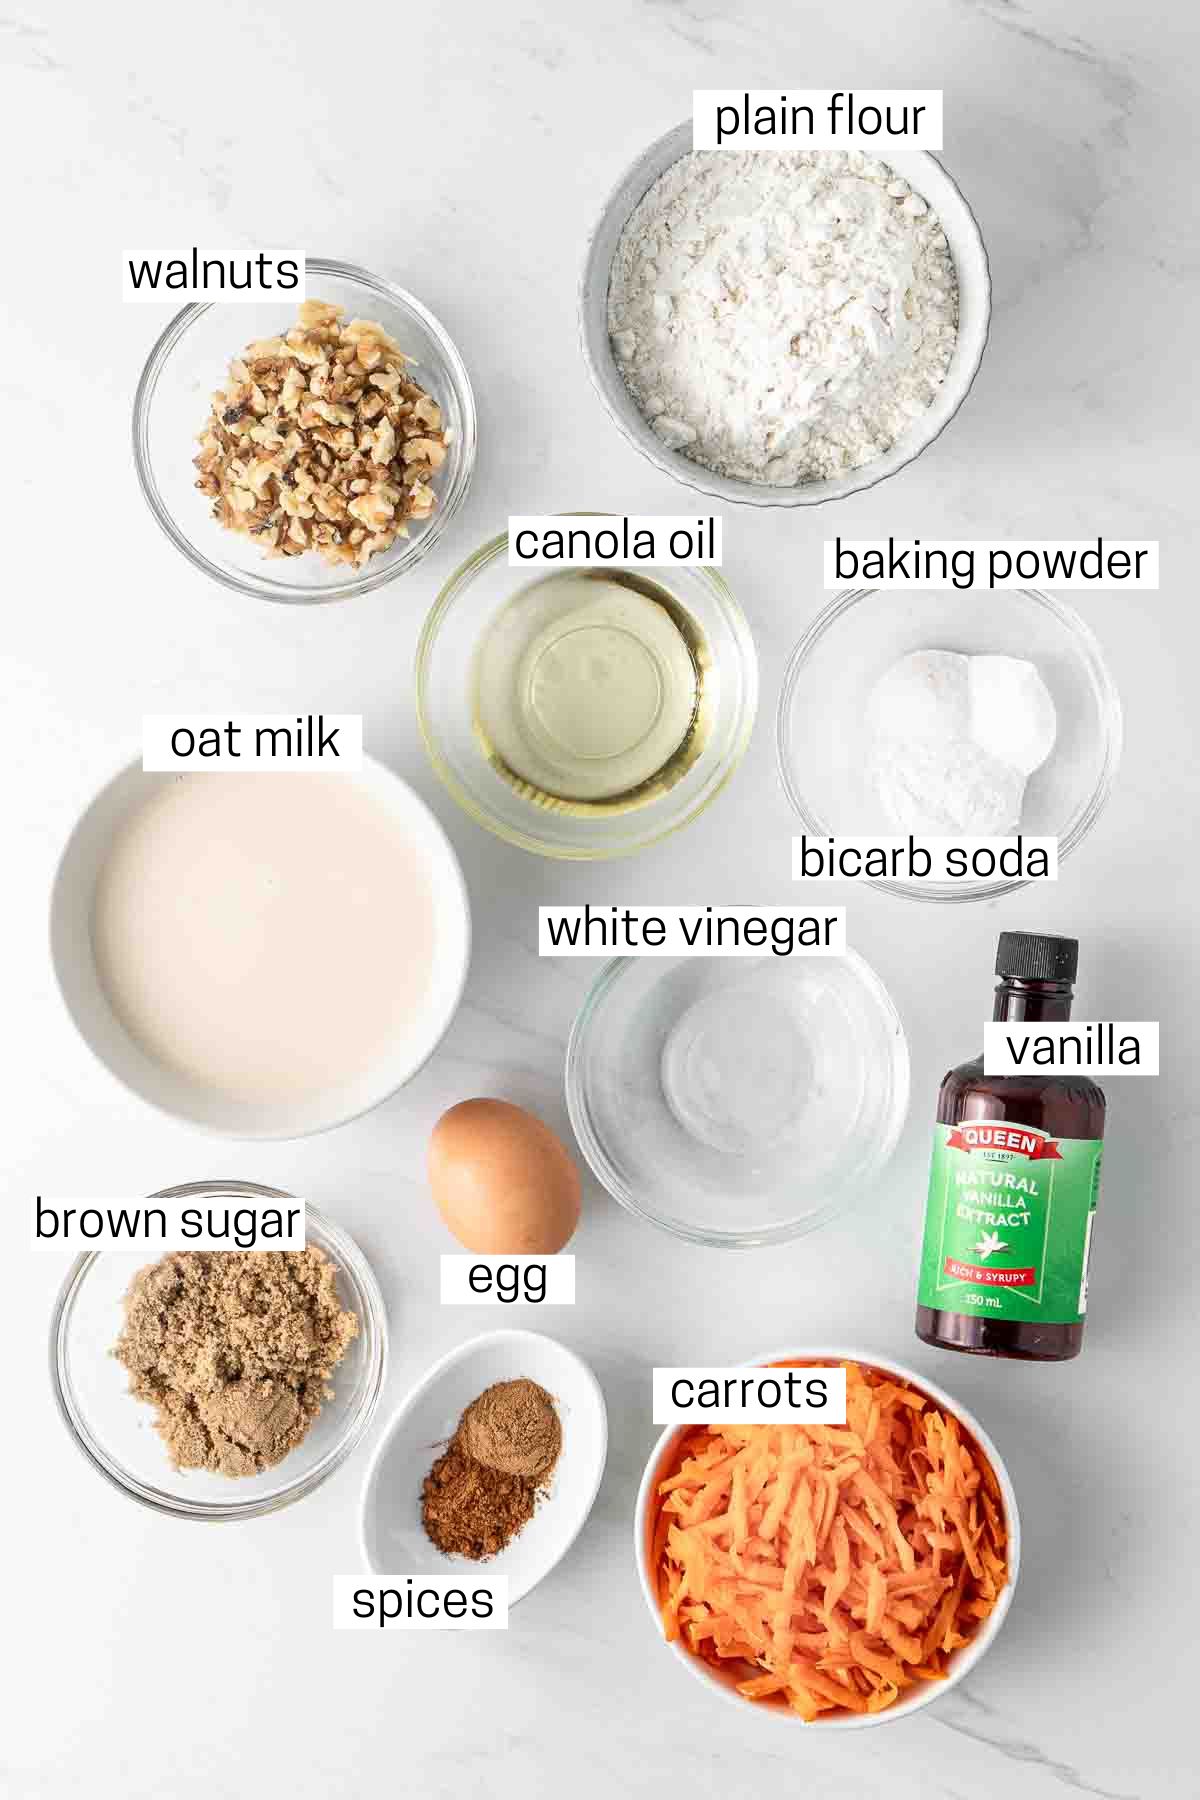 All ingredients needed for carrot cake pancakes laid out in small bowls.